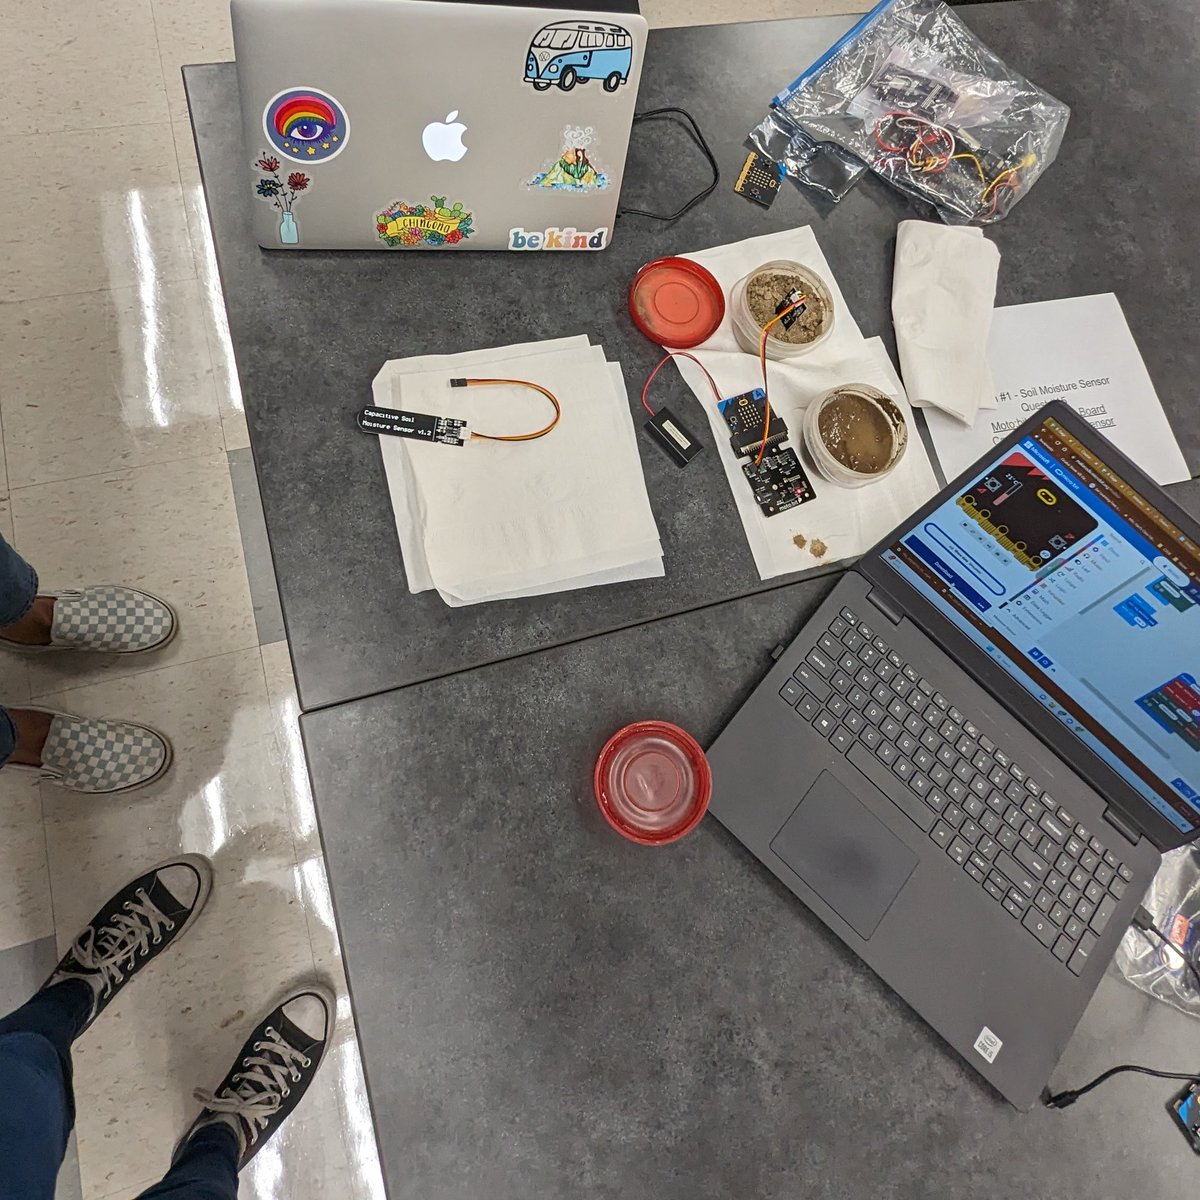 Today @jse_CSUB brought together our CSSA group of teachers to work on our Tech Quest activities for class. We dug into moisture sensors, remote control cars, data logger, and more. Thank you! We appreciate it! @vanhornhornets @CastleSTEAM @csubted @microbit_edu